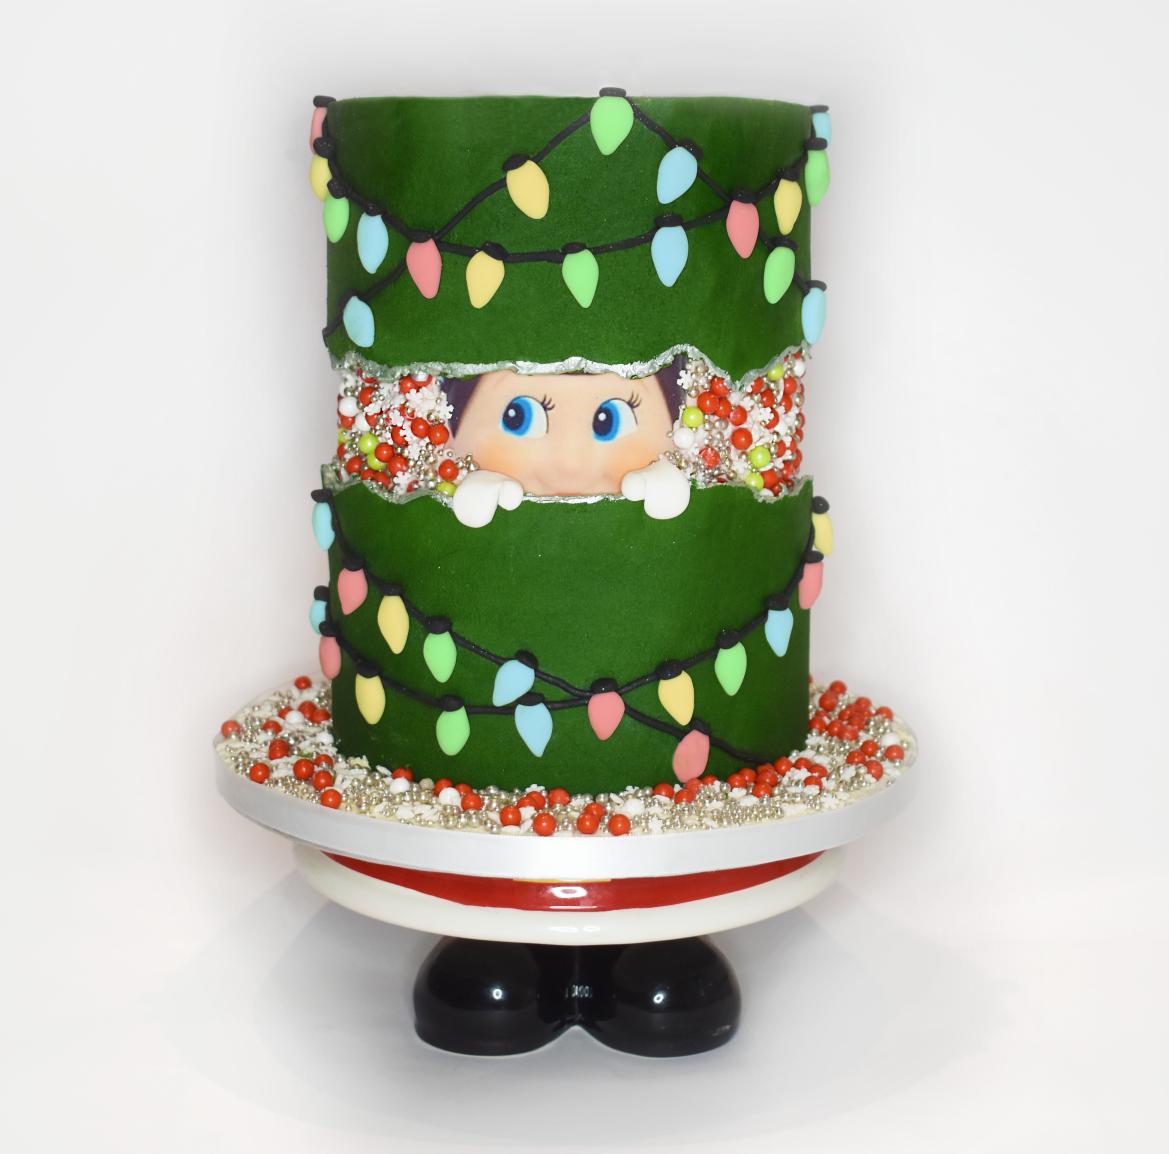 Elf on the shelf fault line cake using an A4 icing cake topper